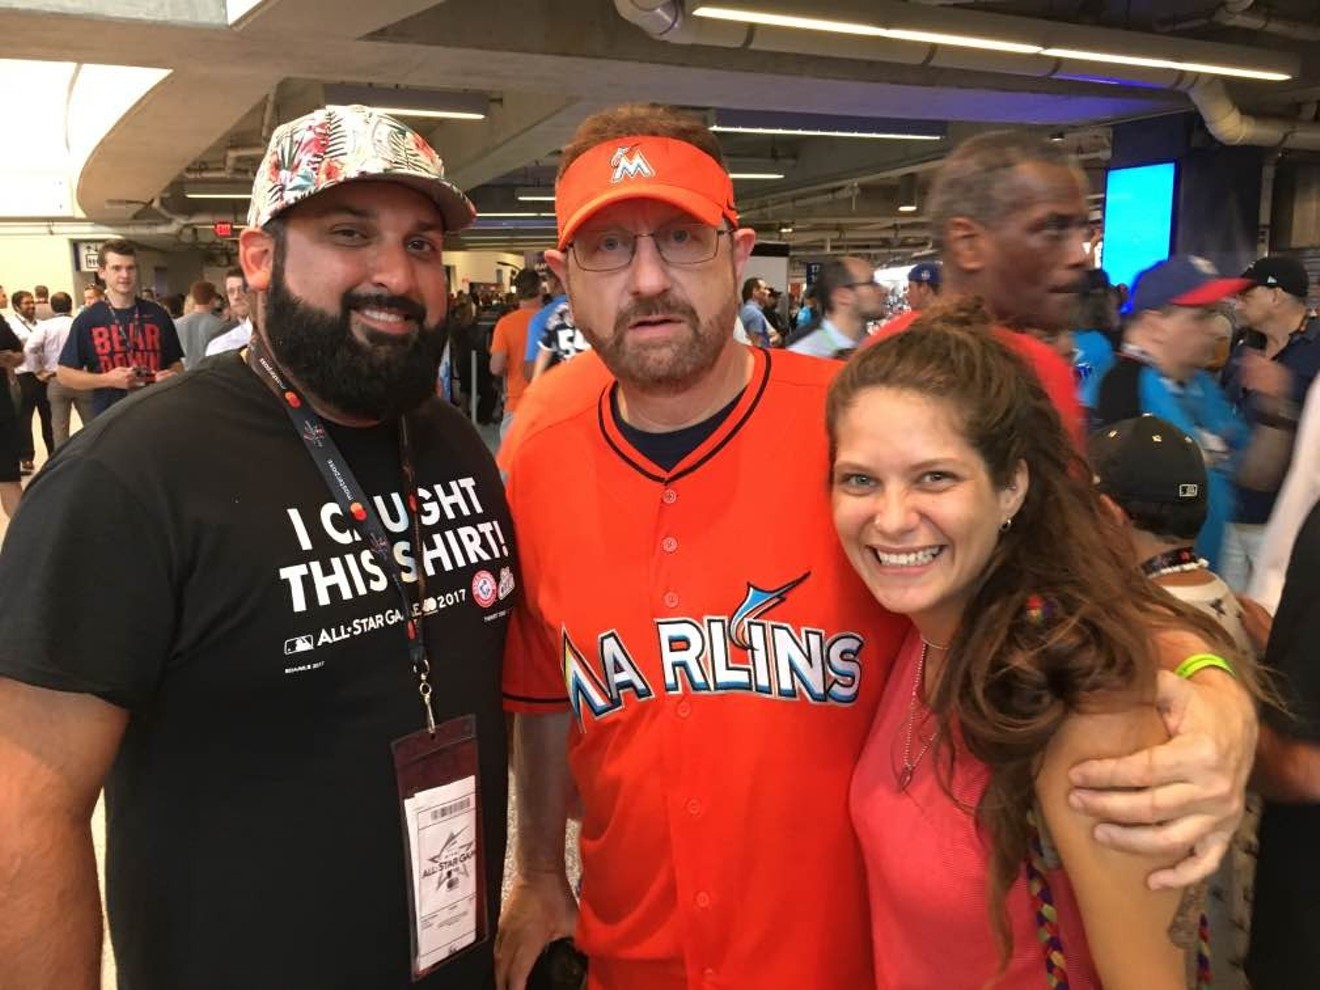 Marlins Man Pays the Price as Jeter Cuts All Ties With Loria Era